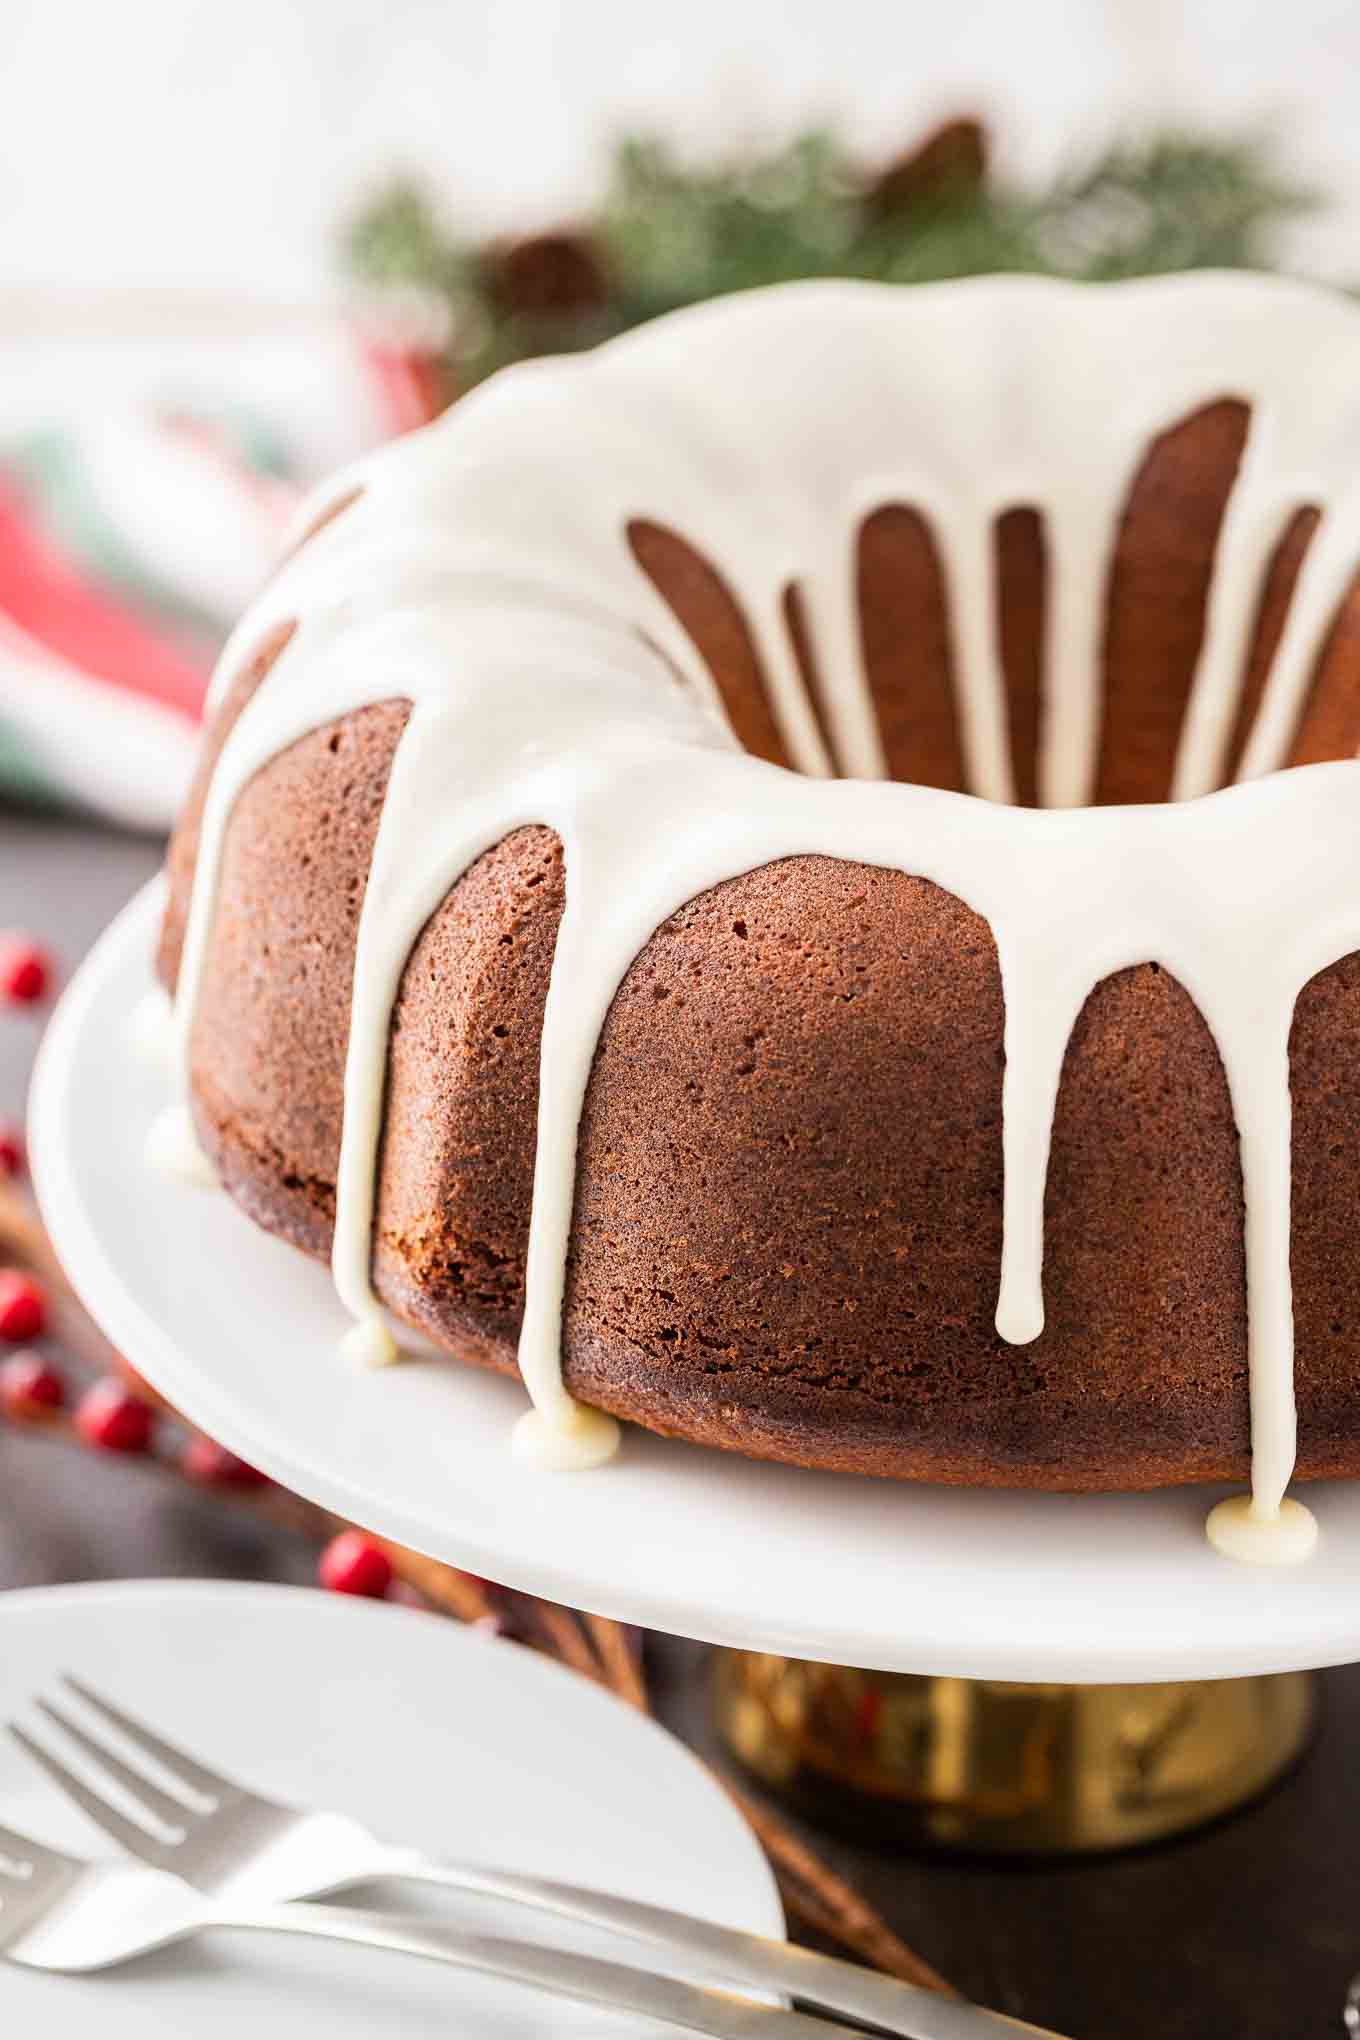 A bundt cake with white glaze dripping off it on a white platter.